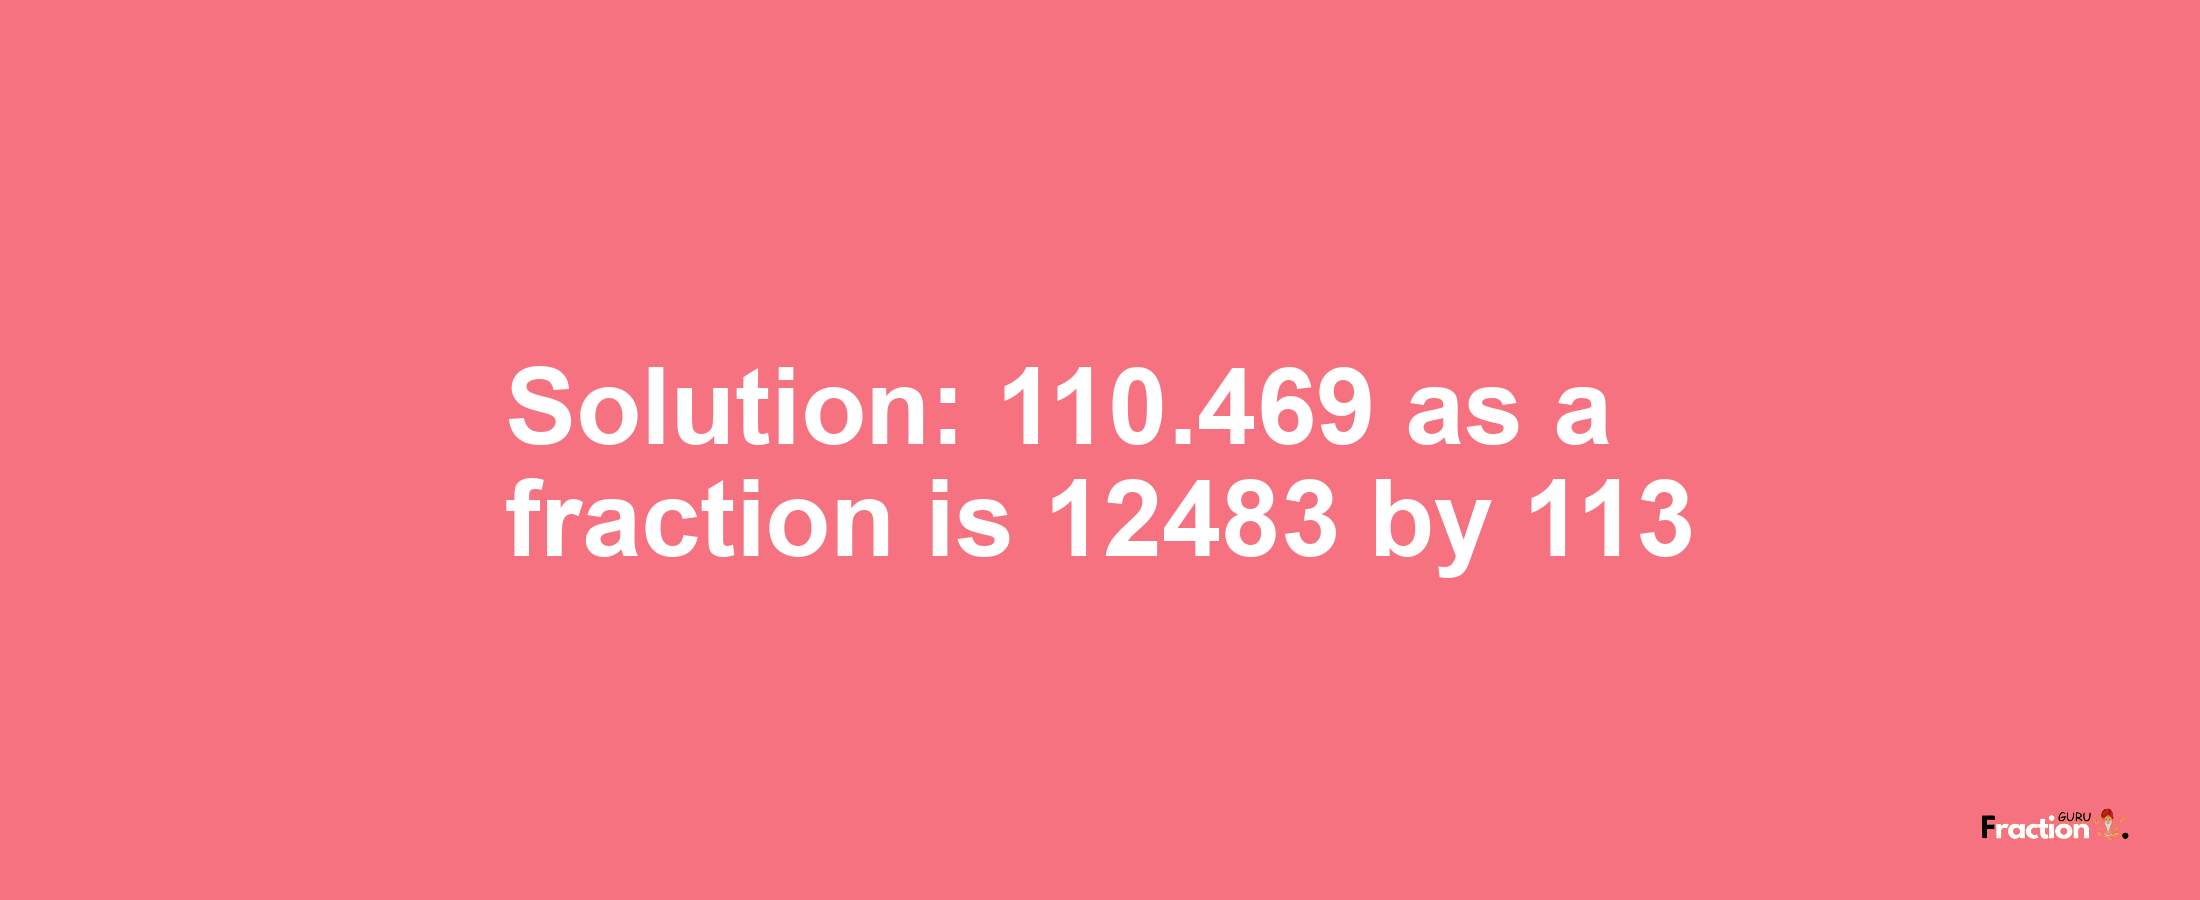 Solution:110.469 as a fraction is 12483/113